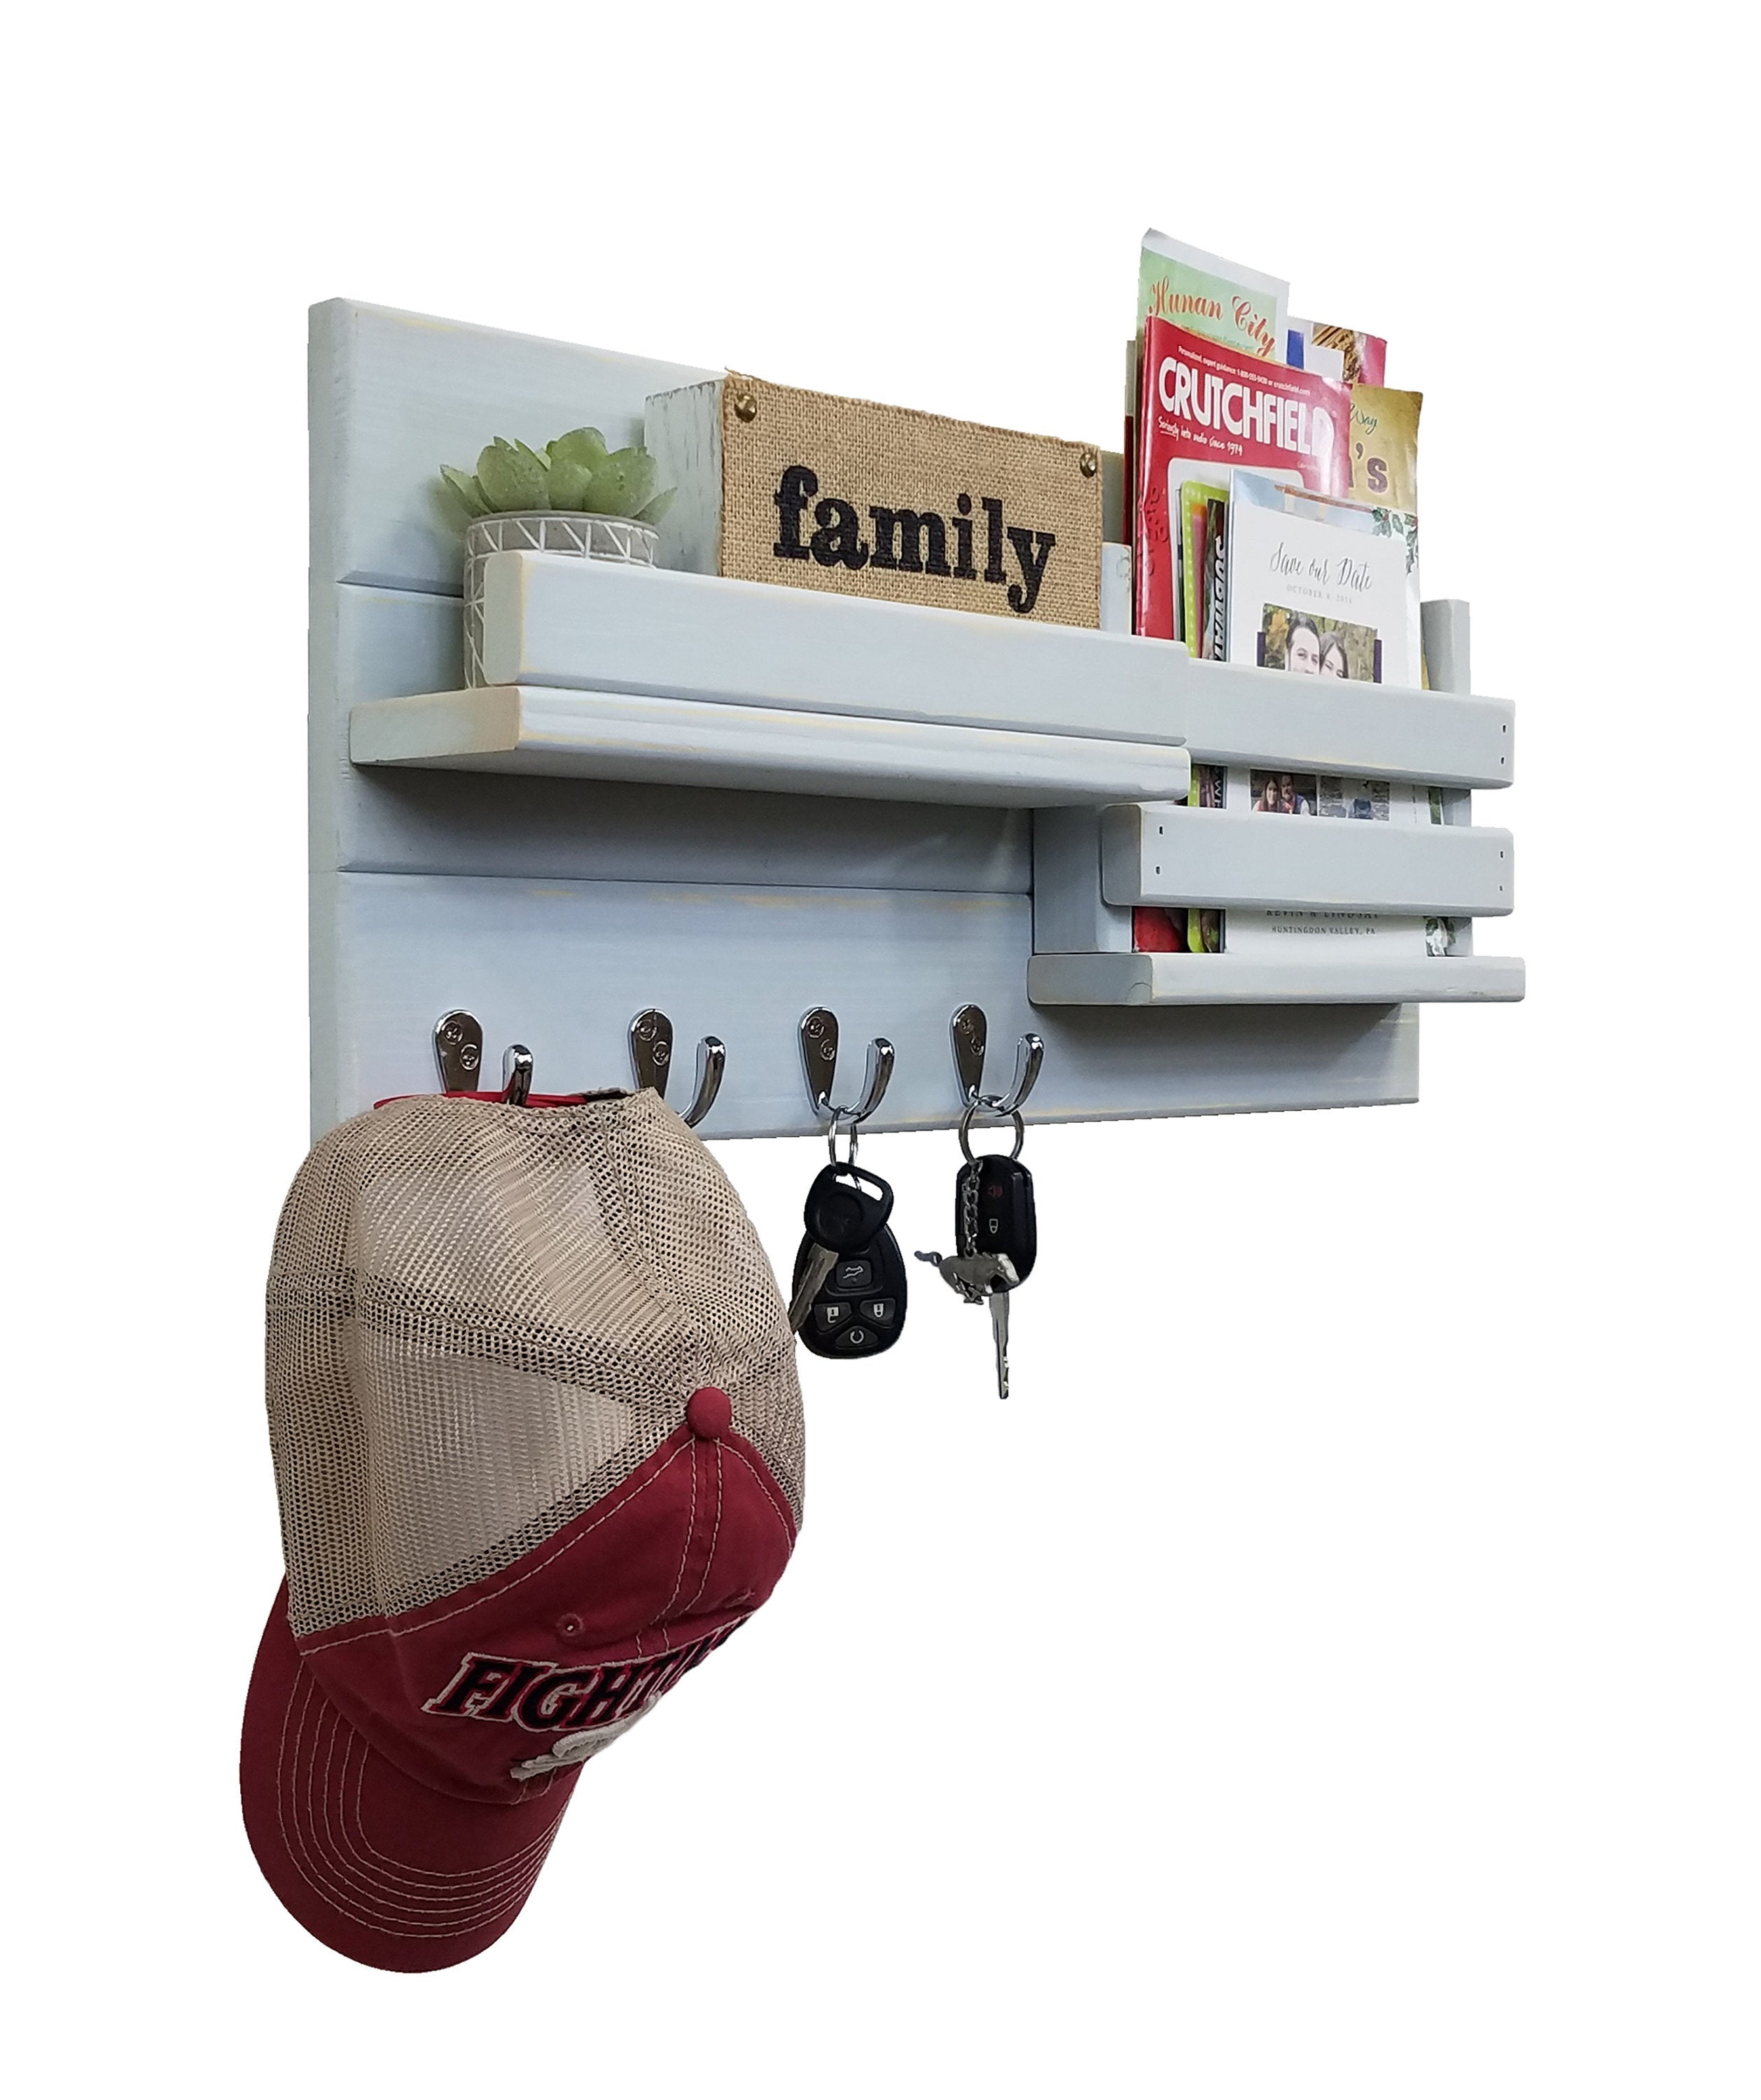 Classic Farmhouse Rustic Wall Organizer - 20 Paint Colors, Shown in Light French Gray, Chrome Hooks